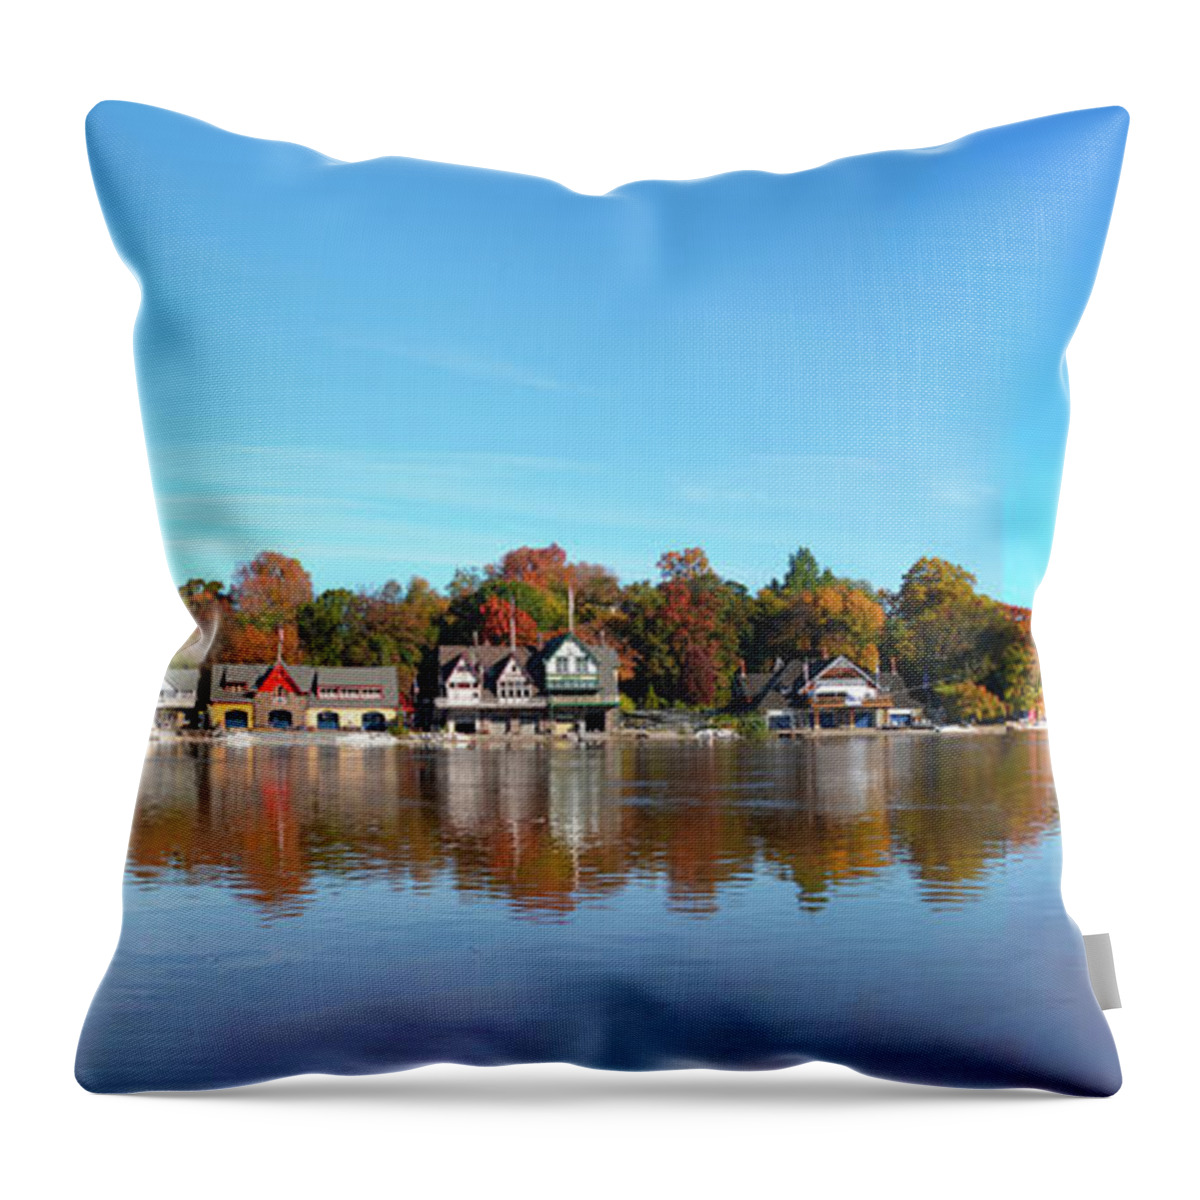 Wide Throw Pillow featuring the photograph Wide View of Boathouse Row by Bill Cannon